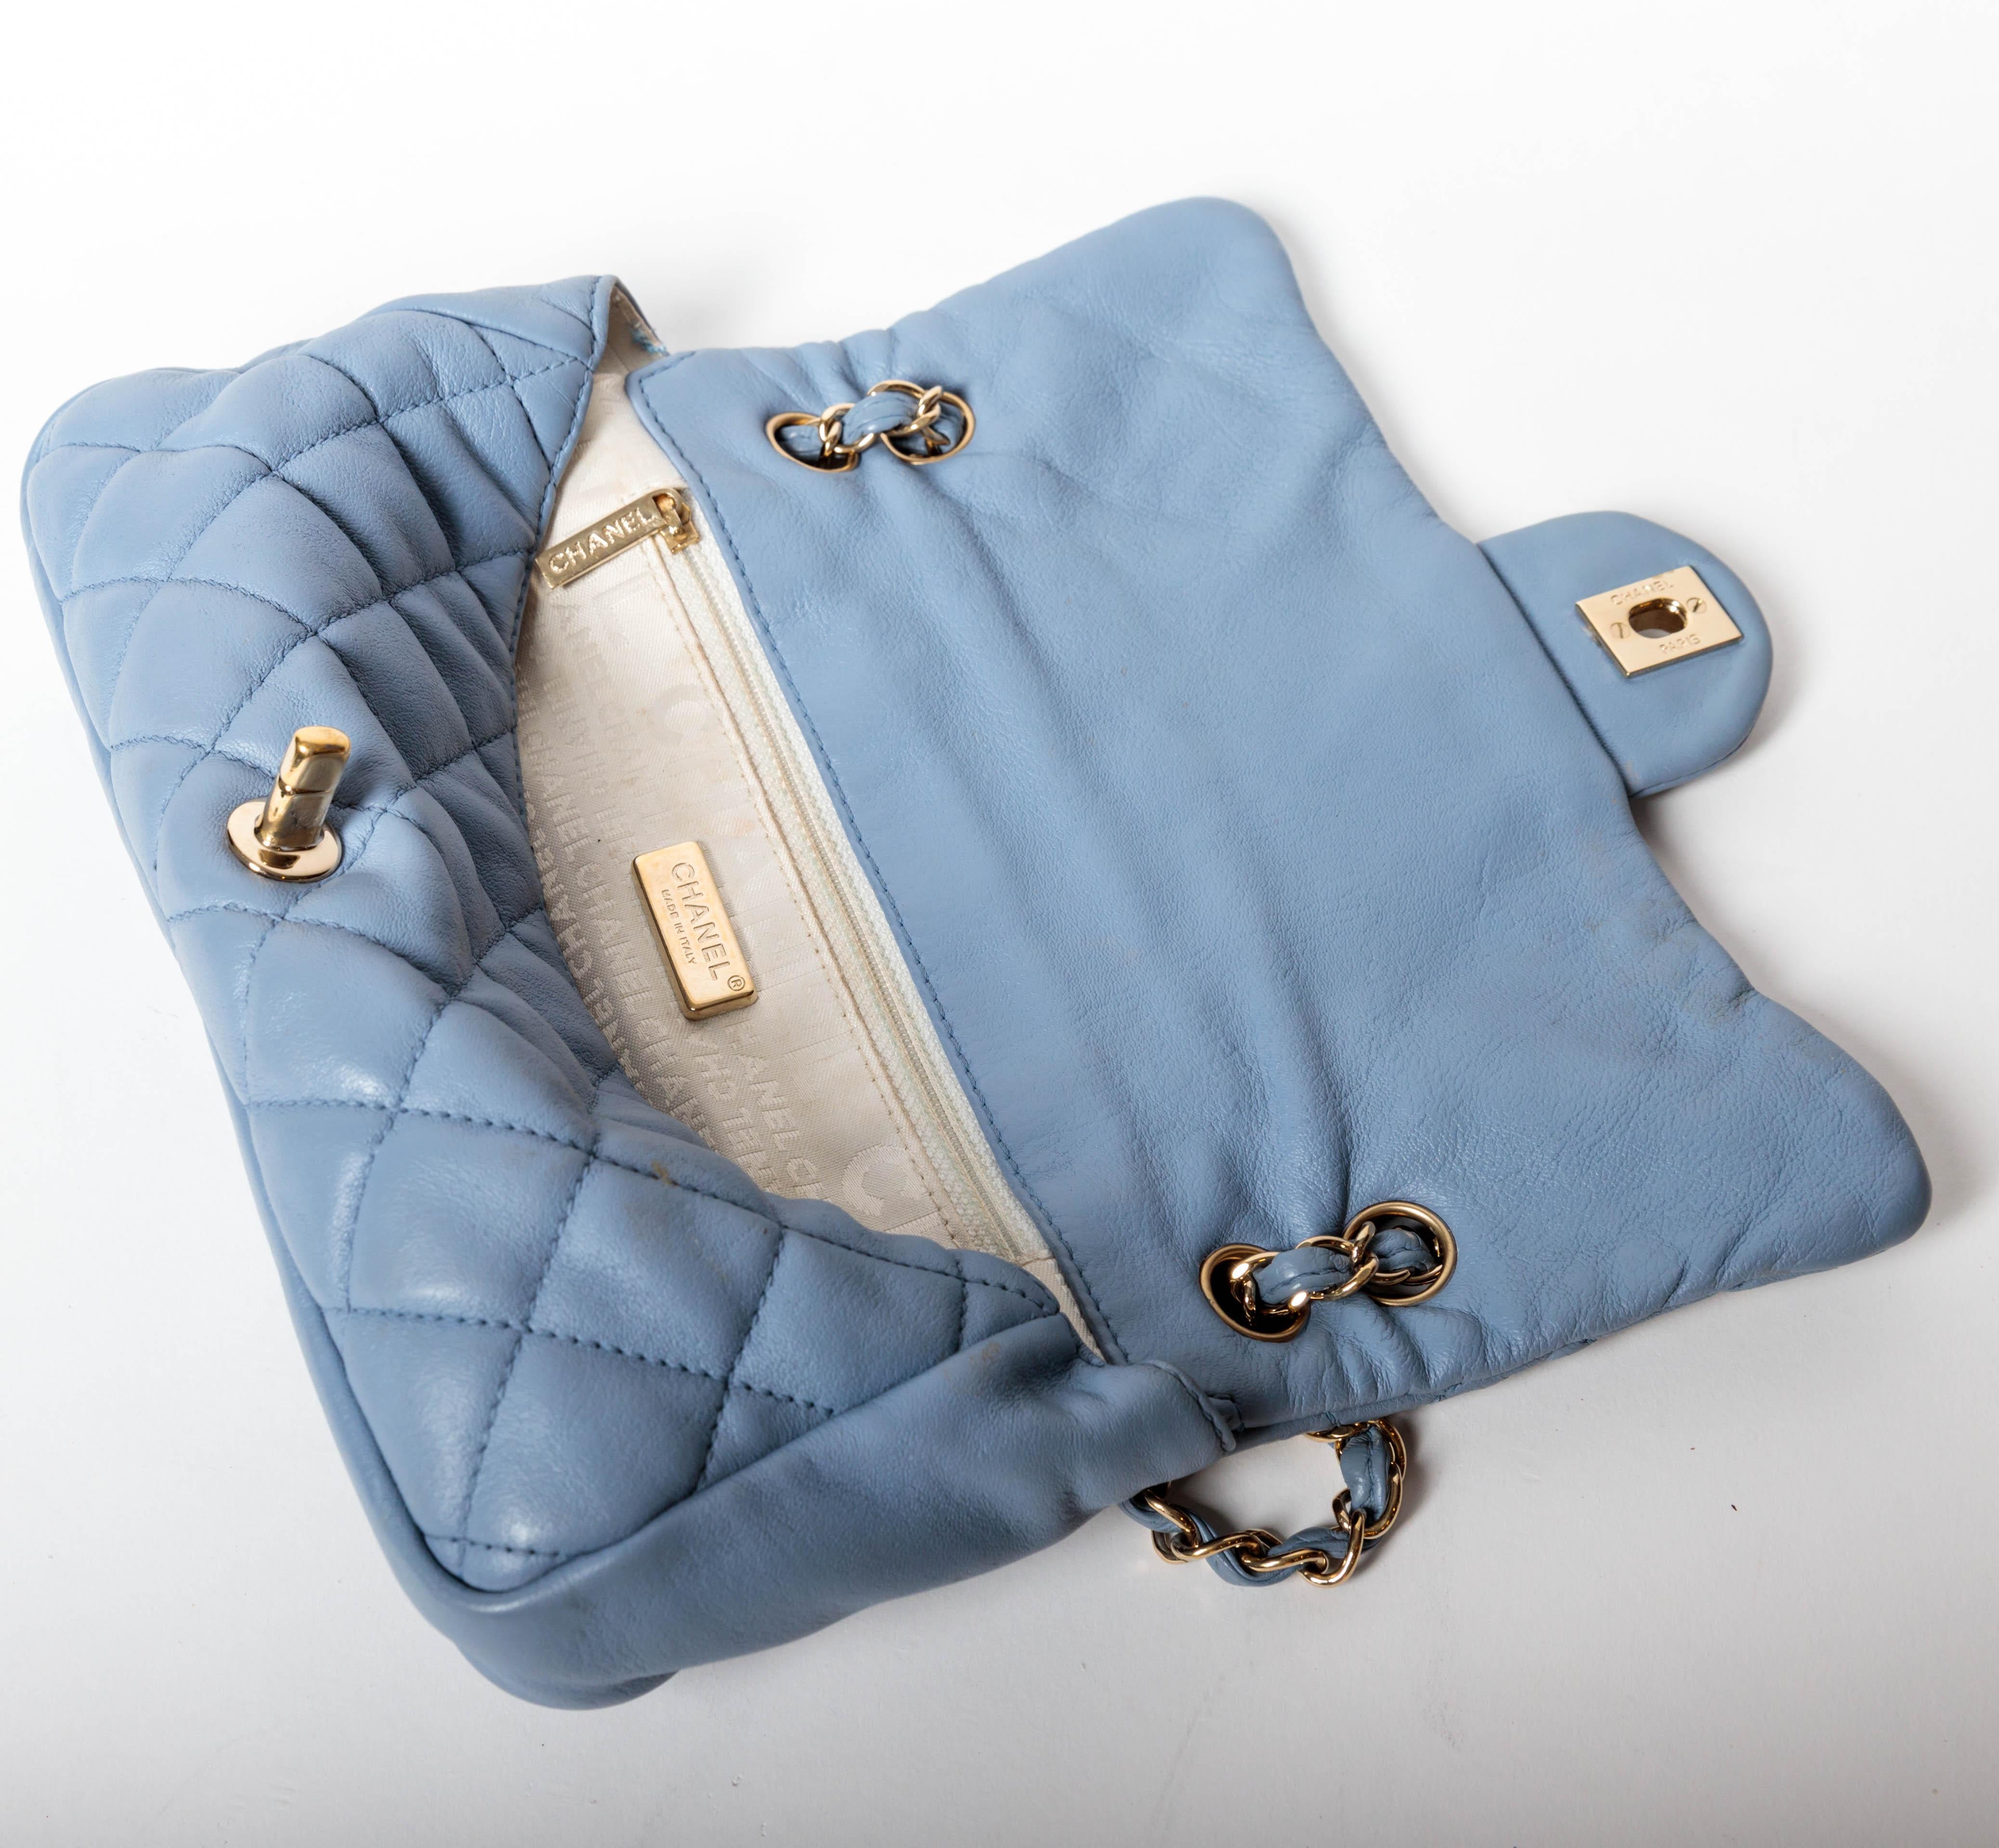 Chanel Powder Blue Single Flap with Gold Hardware - 2005 - 2006 Collection For Sale 4